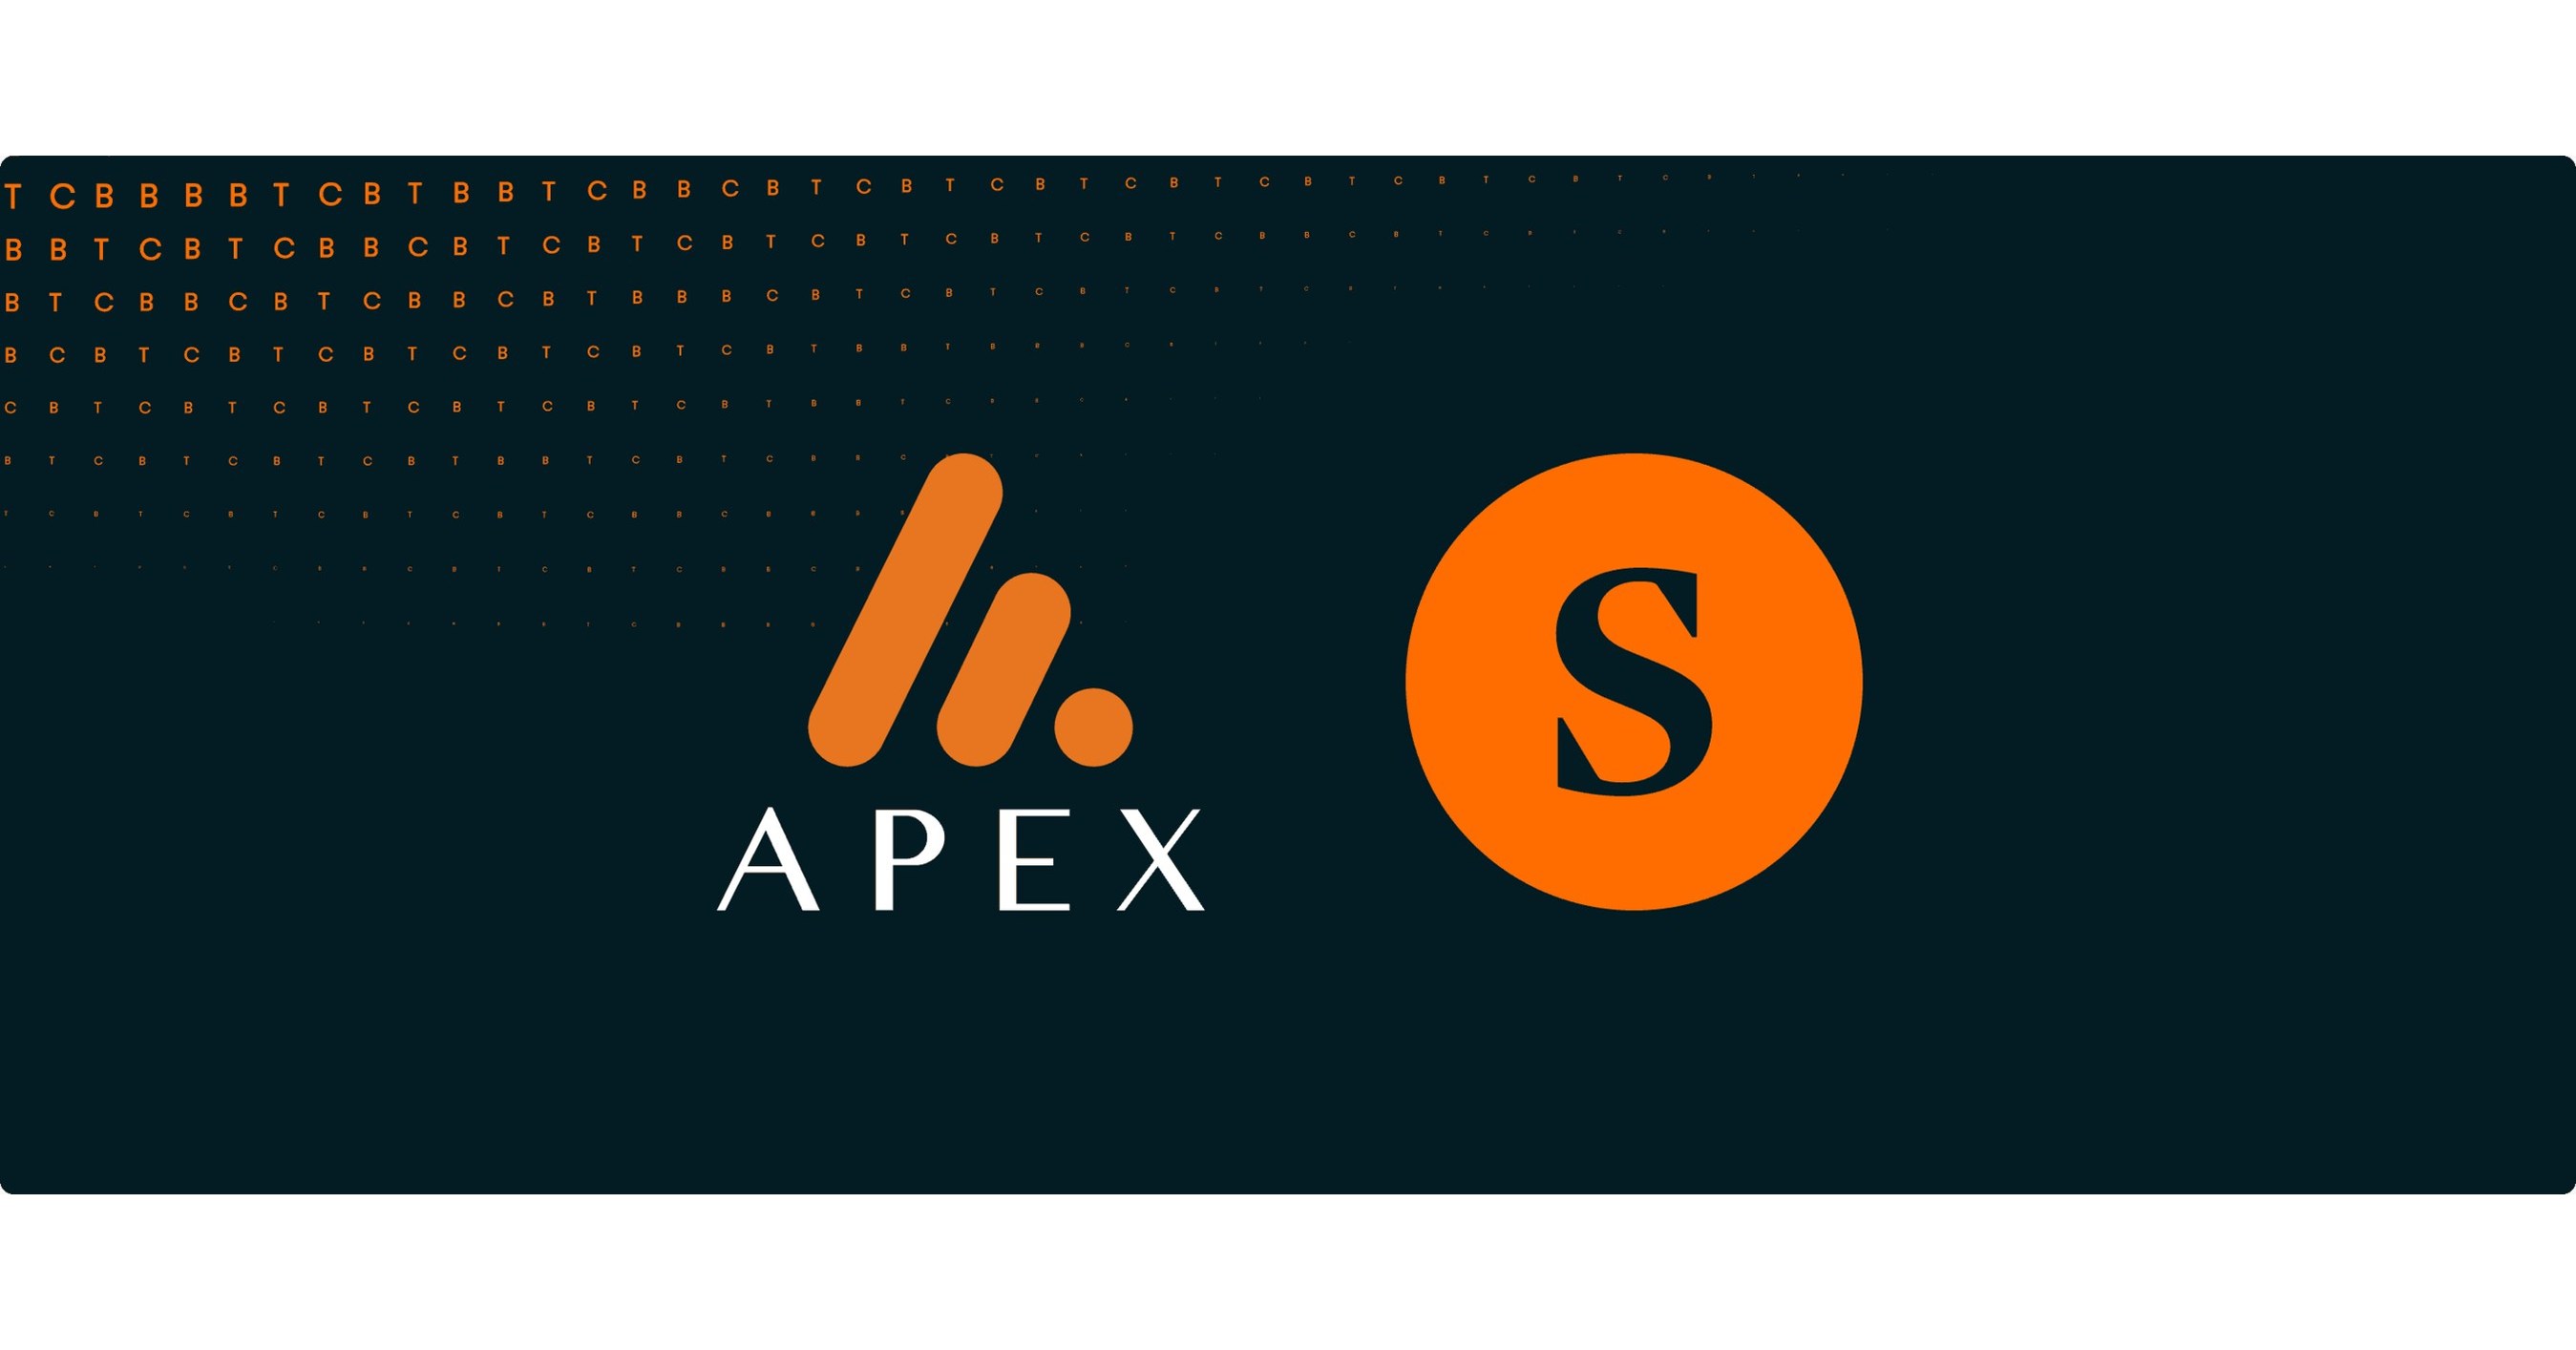 Apex Capital Partners Limited